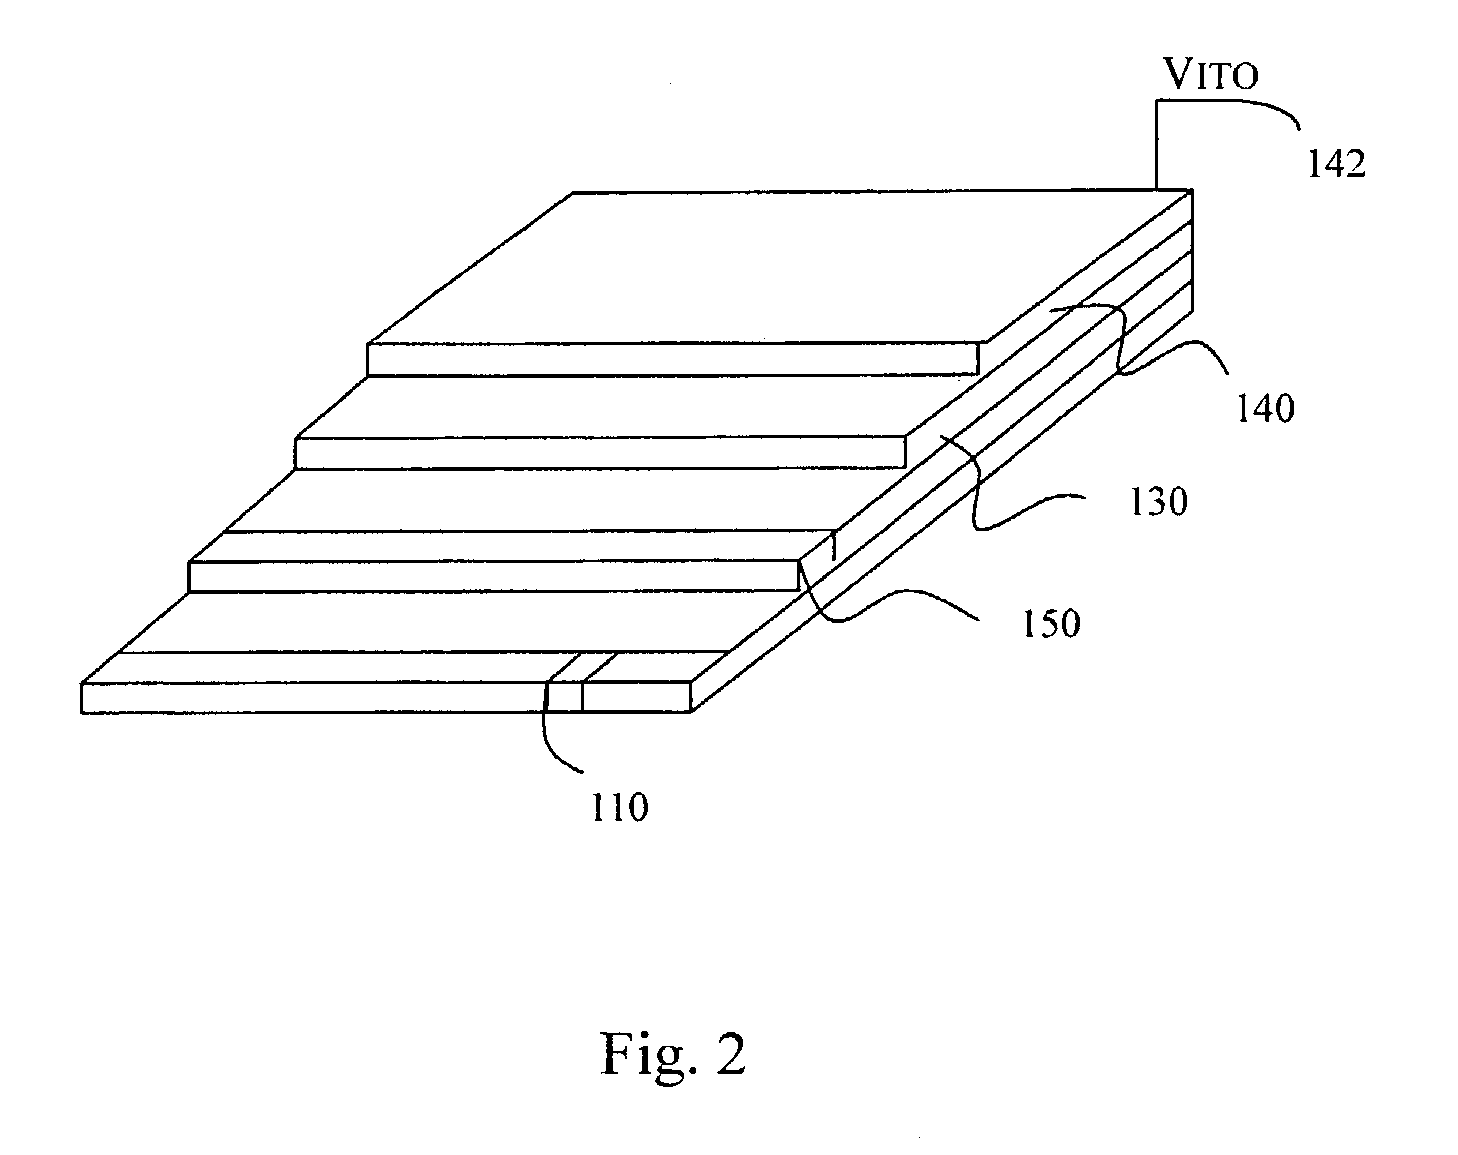 Pixel cell design with enhanced voltage control